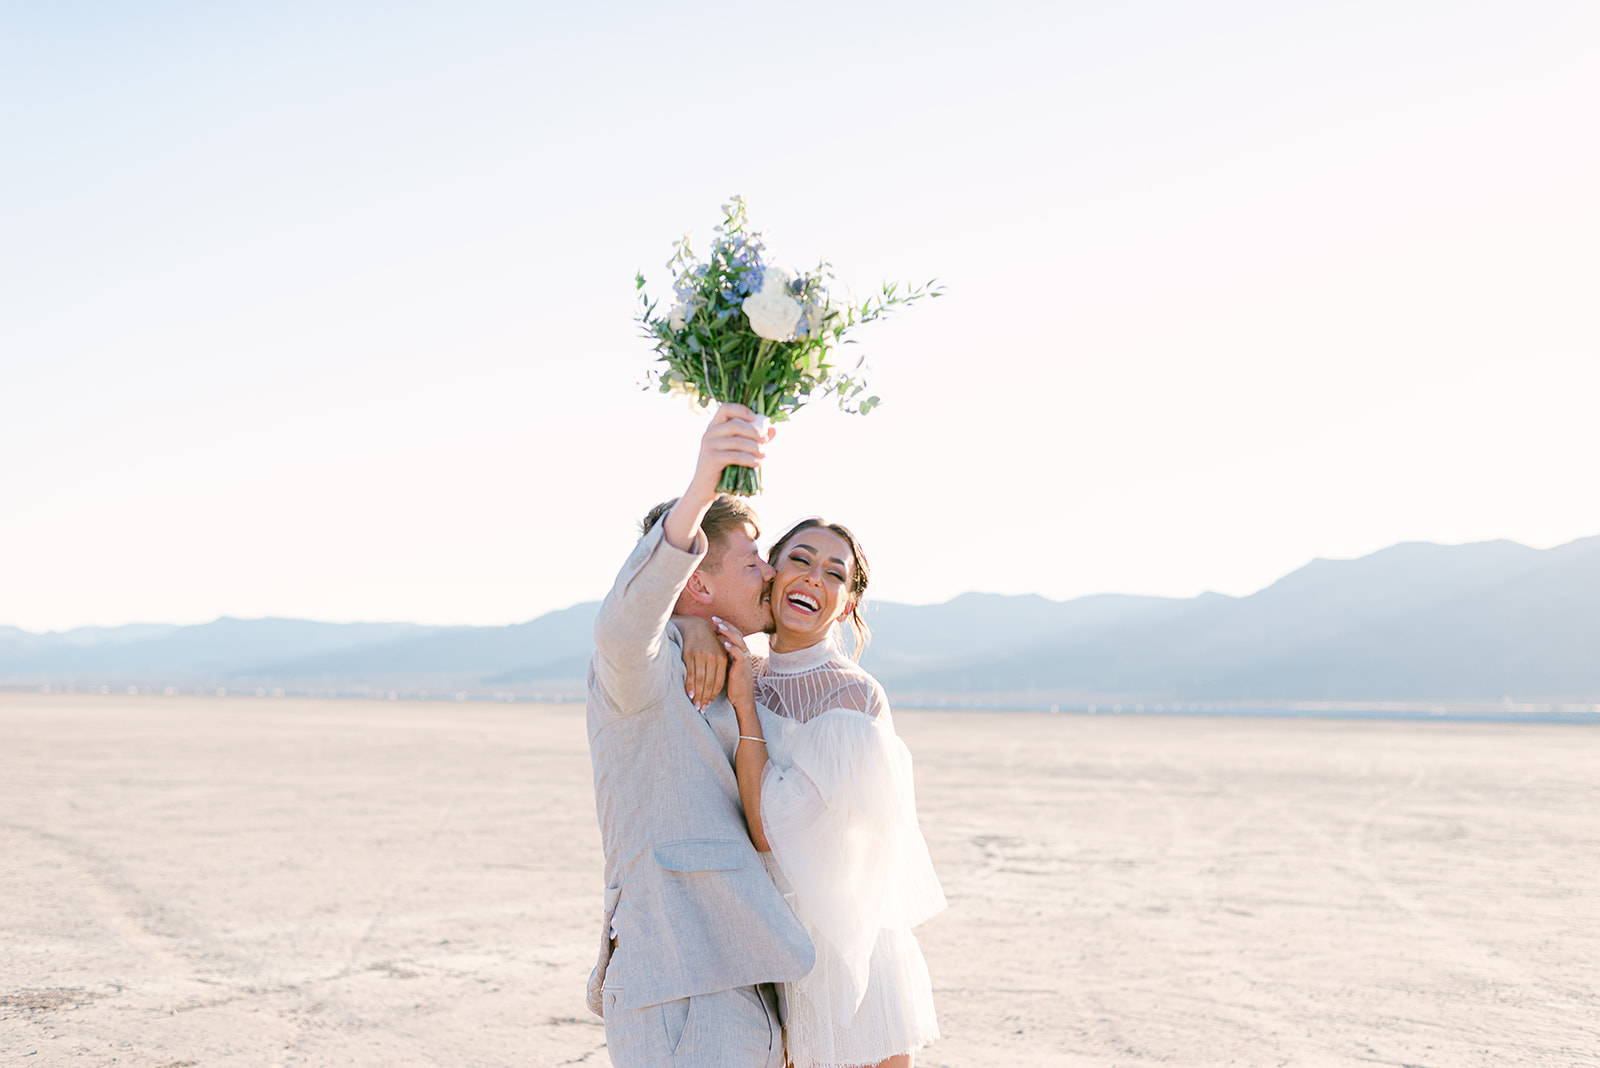 Groom holding up bride's bouquet as she wraps her arms around him during elopement shoot in Las Vegas